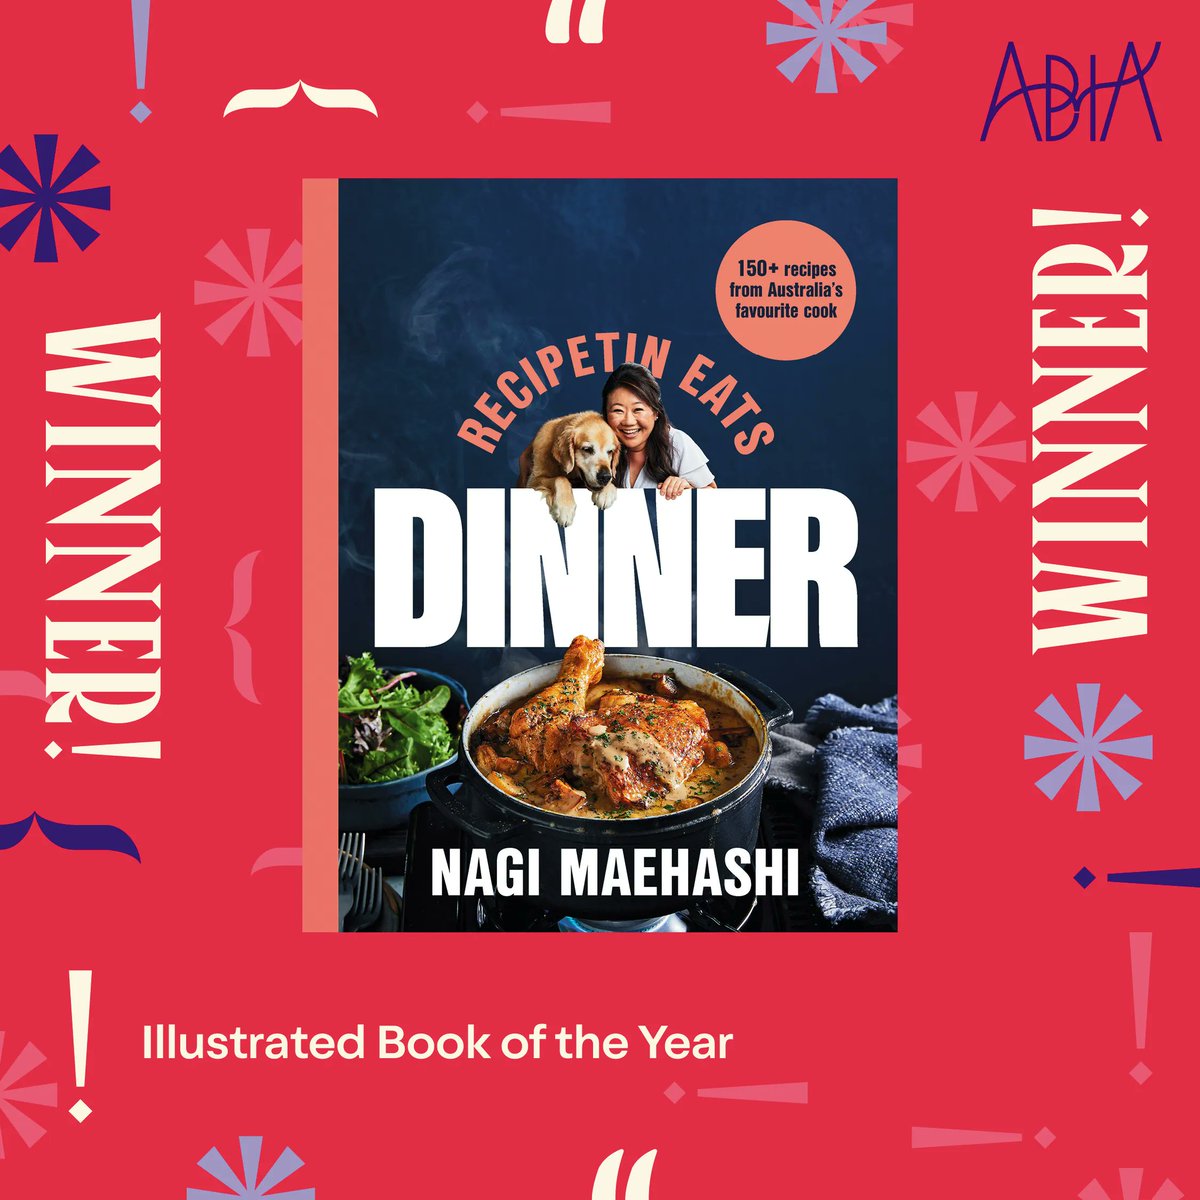 The #ABIA2023 Illustrated Book of the Year goes to ‘RecipeTin Eats: Dinner’ by Nagi Maehashi @Recipe_Tin, published by @macmillanaus!